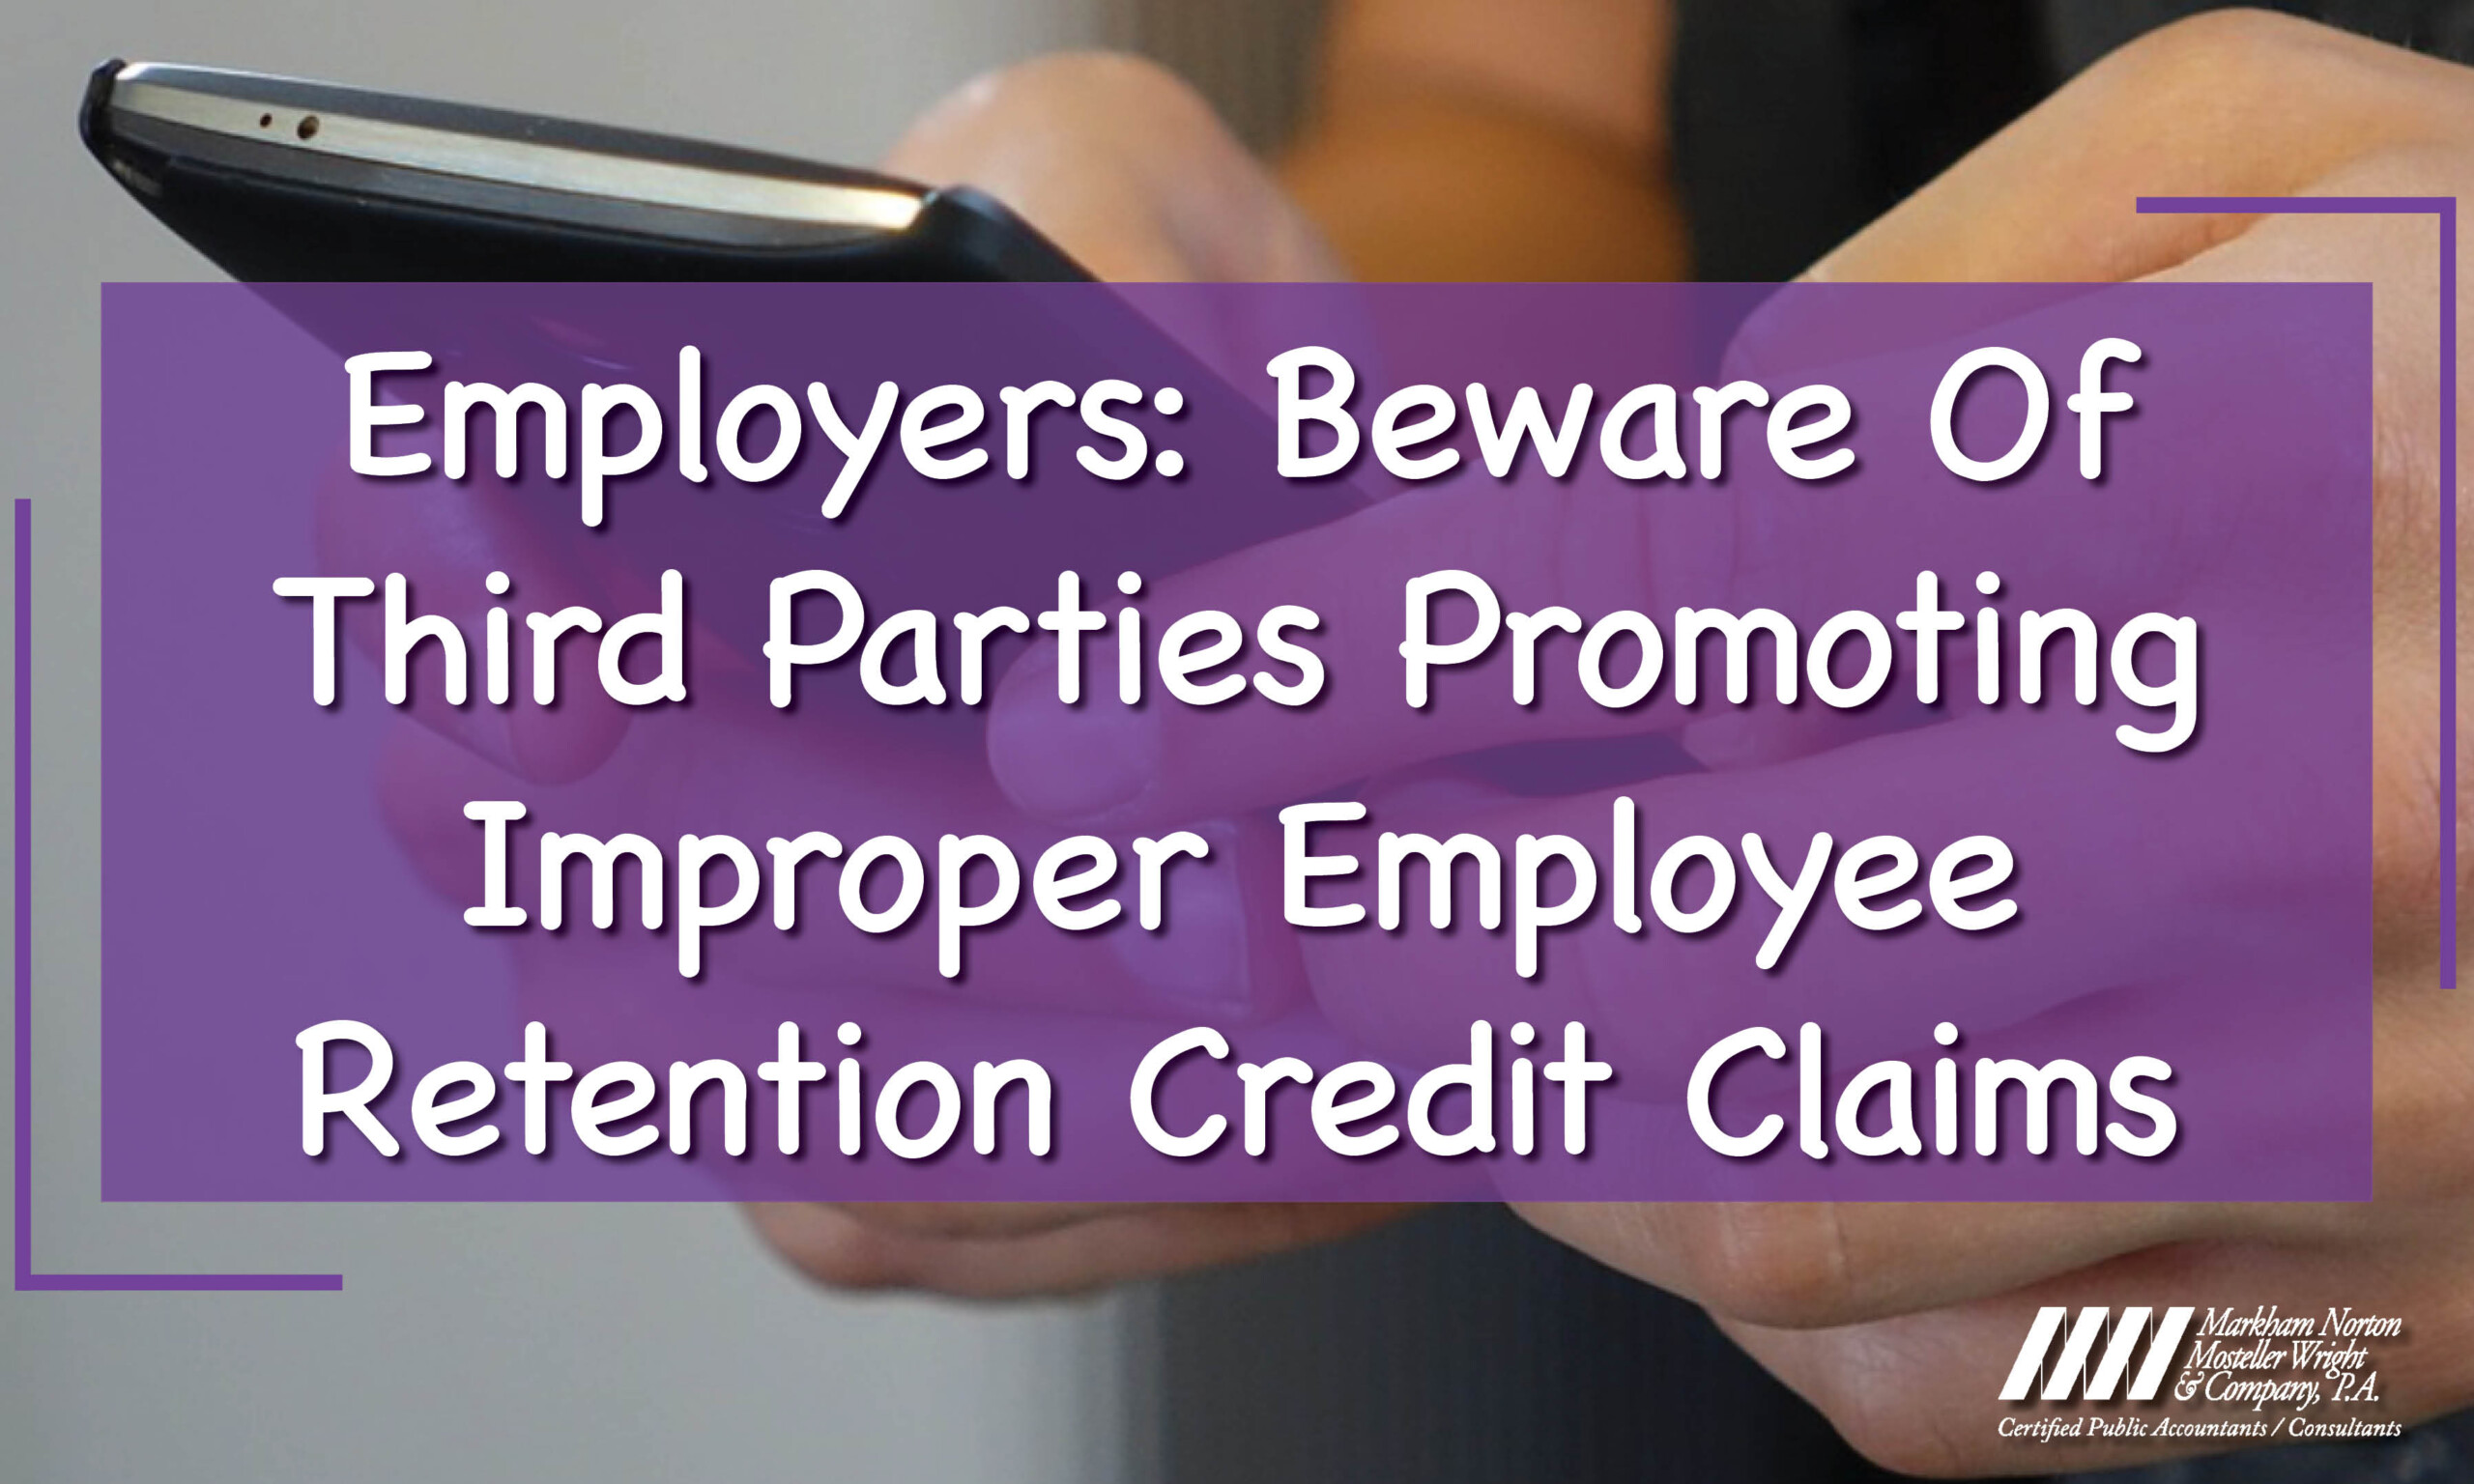 Employers: Beware Of Third Parties Promoting Improper Employee Retention Credit Claims